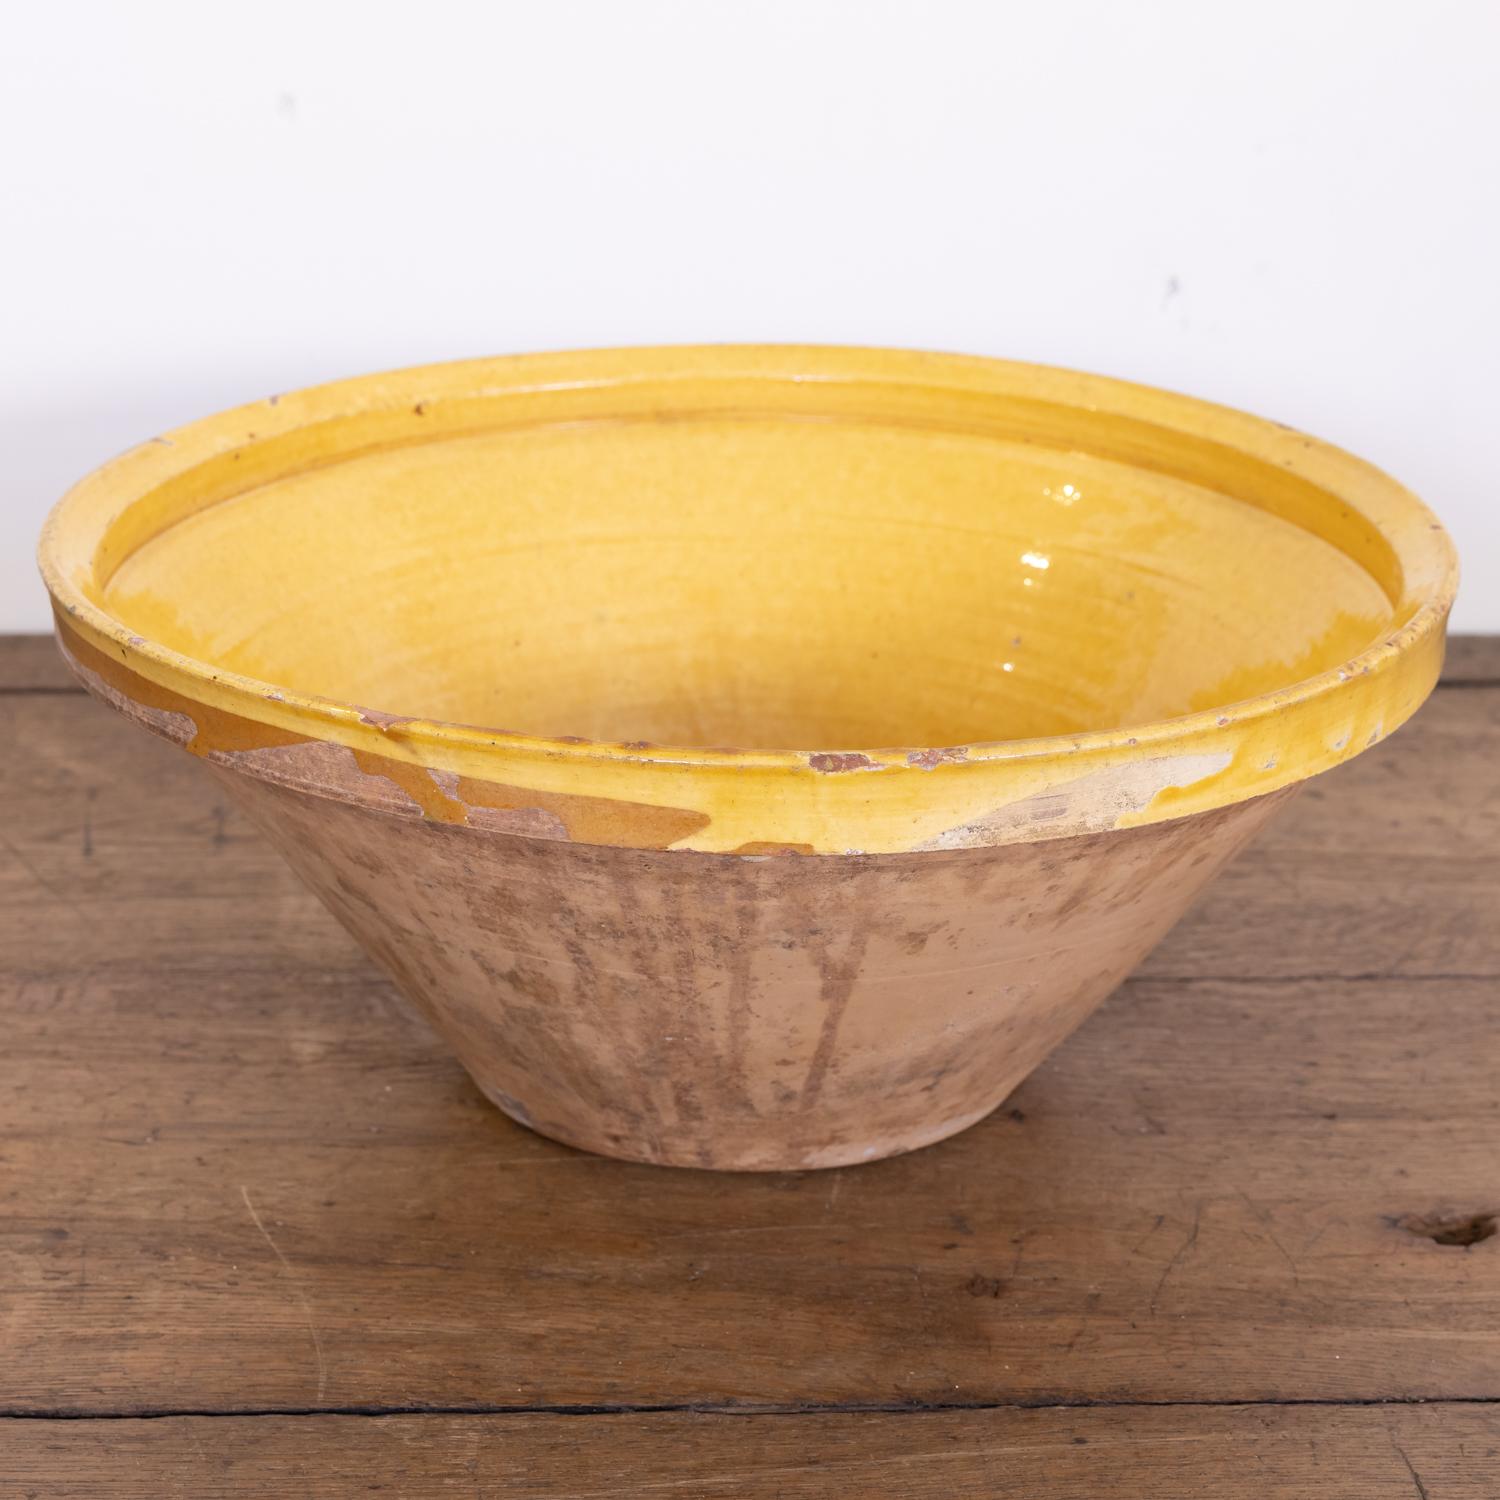 Glazed Antique French Terracotta Pancheon or Dough Bowl with Yellow Glaze